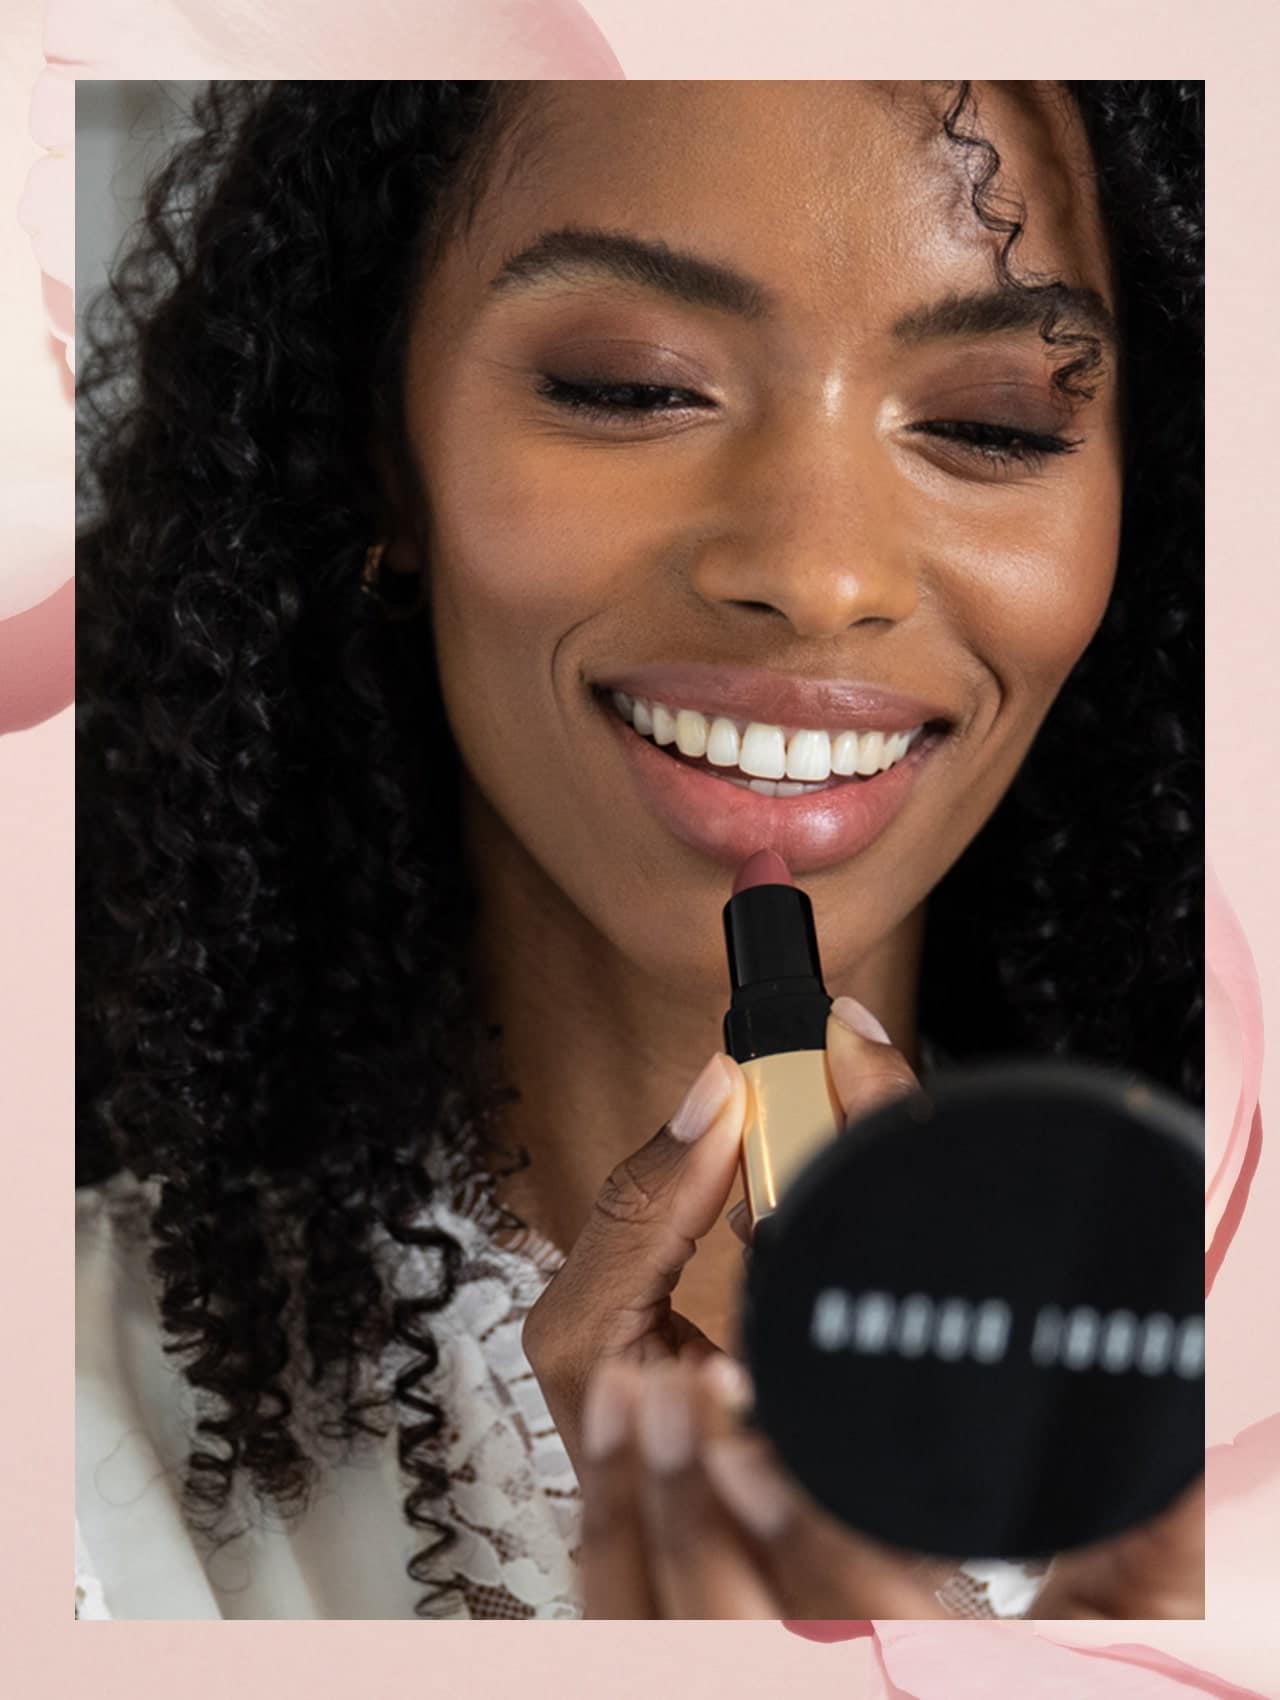 Imagine containing step 5 model applying lipstick, smiling while looking into compact Bobbi Brown mirror